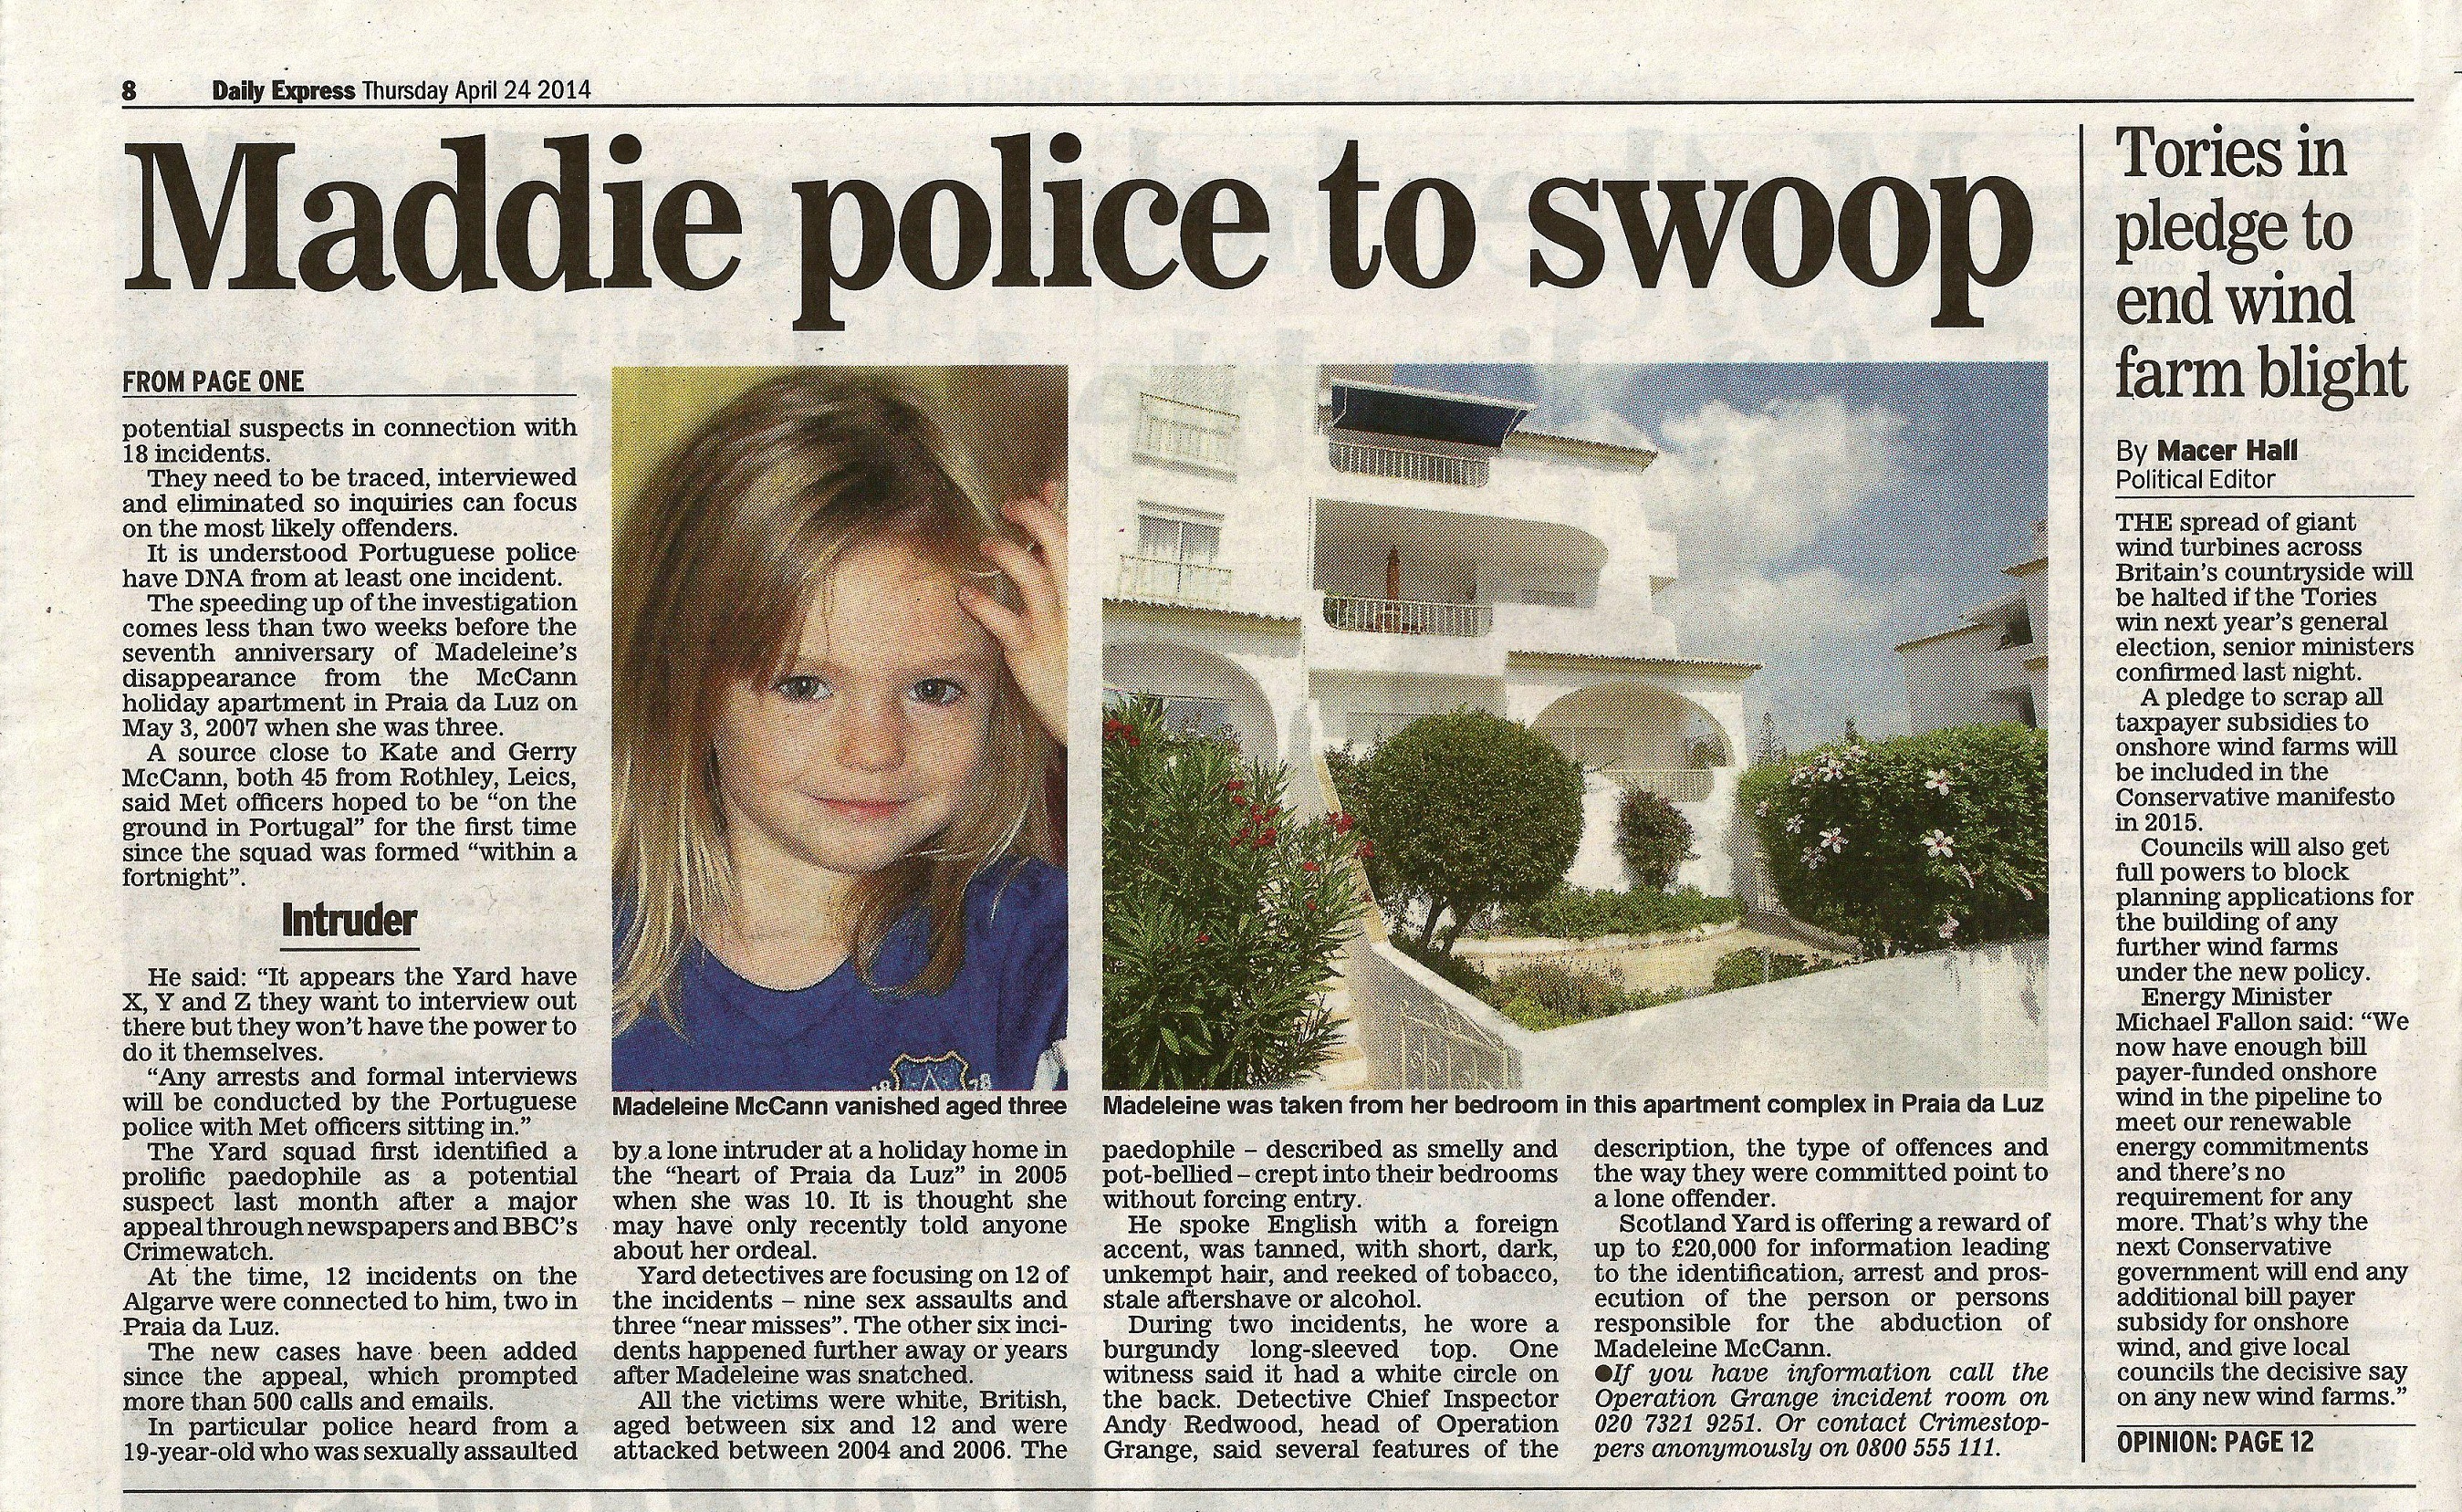 Daily Express, 24 April 2014 (paper edition, page 8)